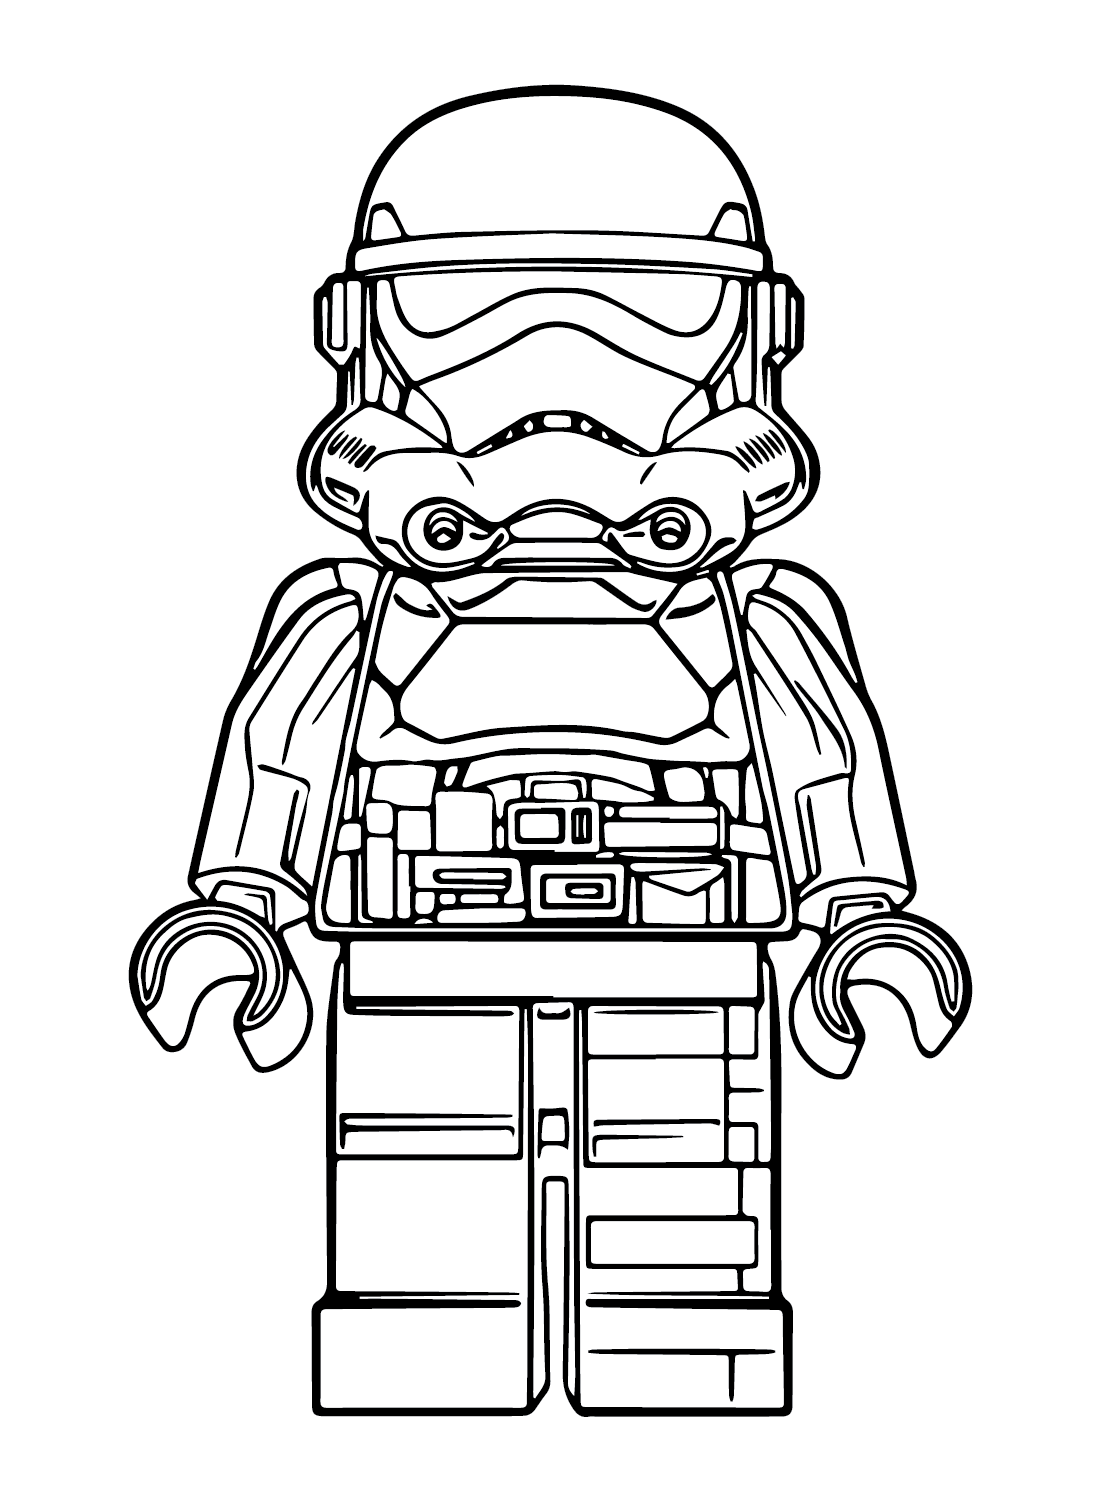 Shock Trooper Lego Coloring Page